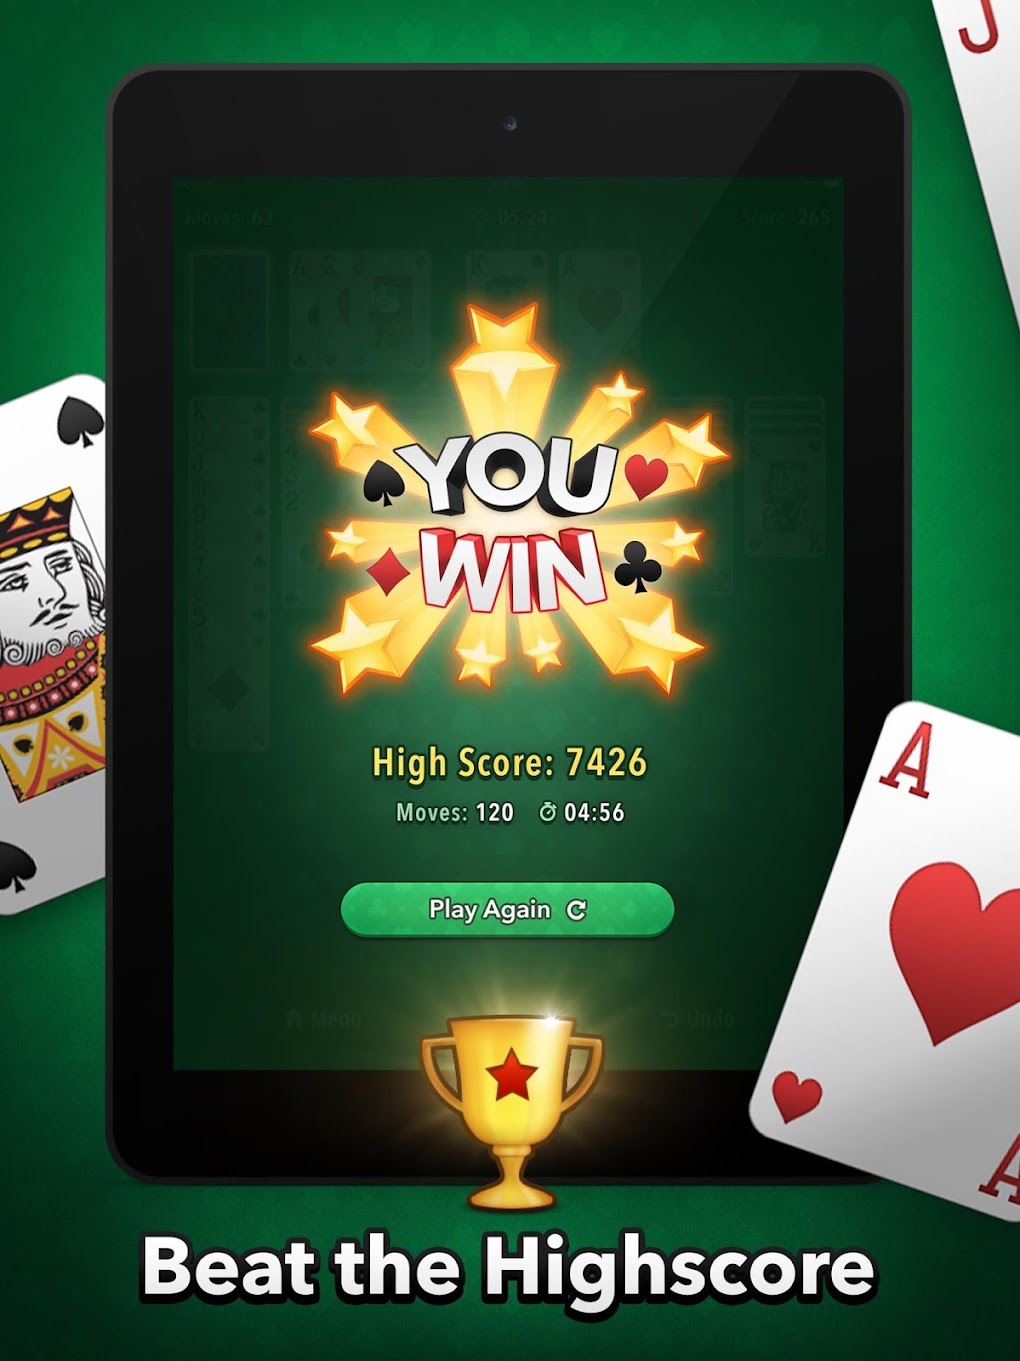 365 Solitaire Gold - Free Online Games